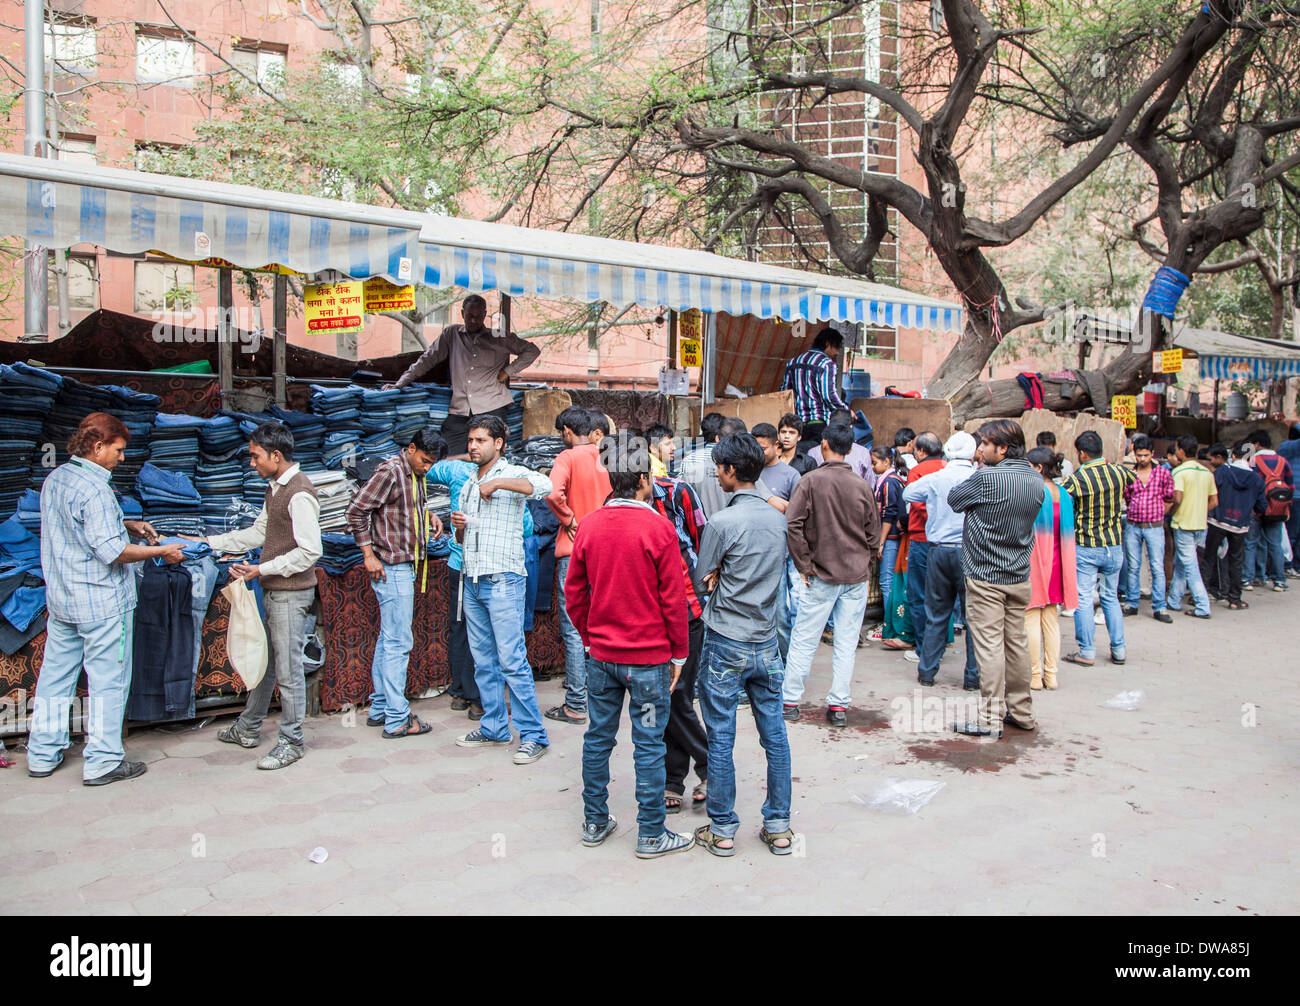 Crowded local market in New Delhi, India: roadside stall on street selling  blue denim jeans piled high Stock Photo - Alamy